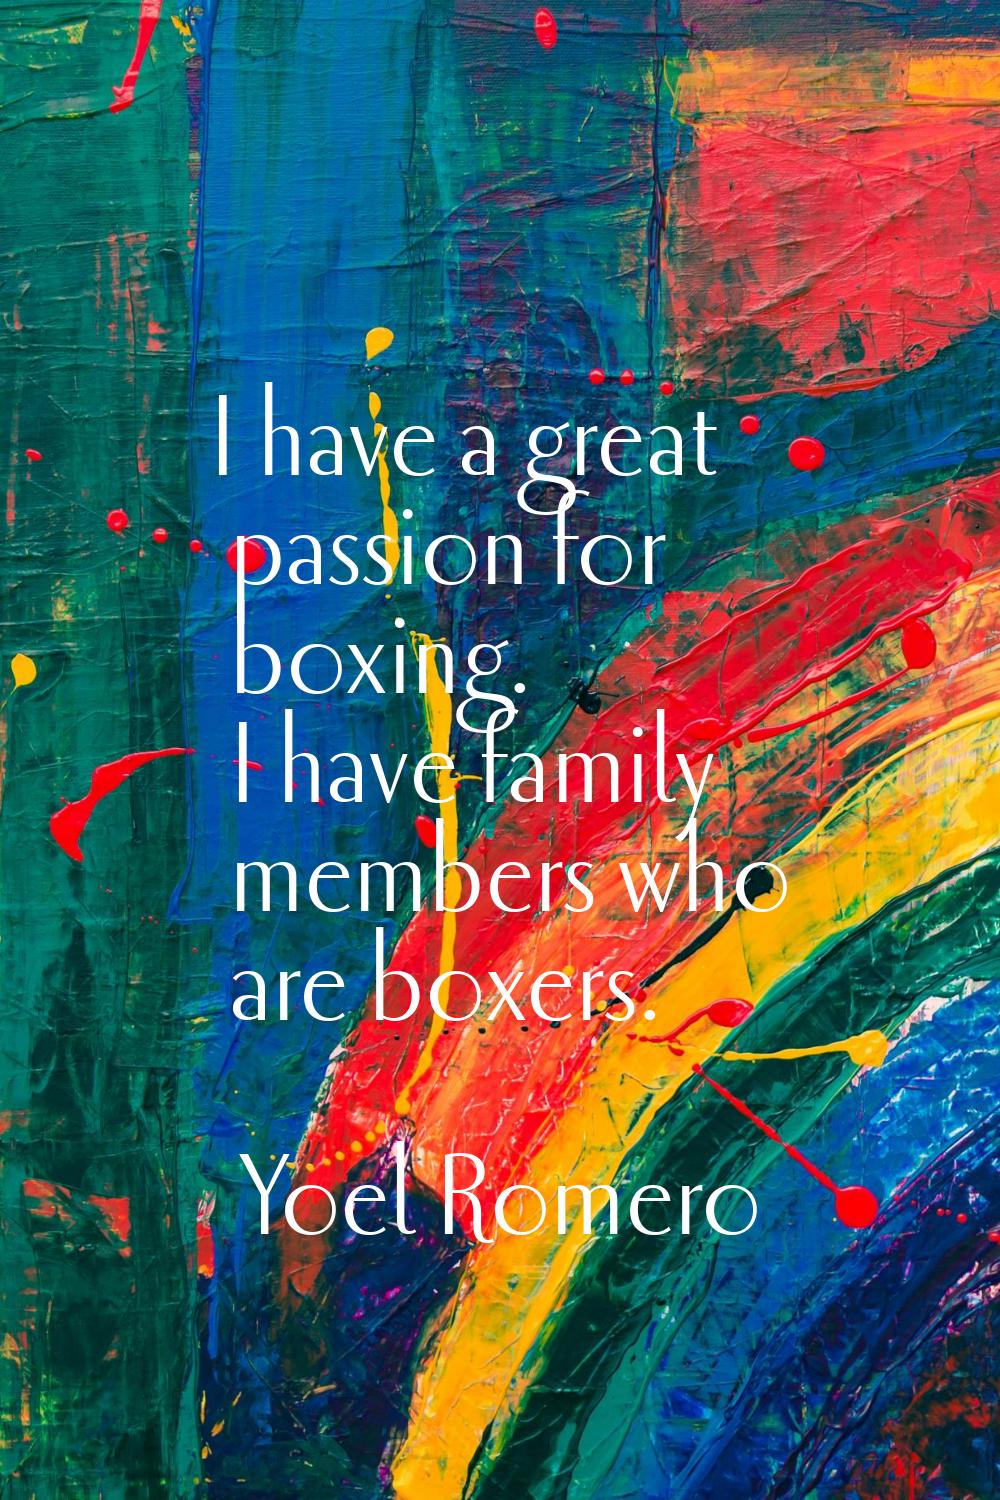 I have a great passion for boxing. I have family members who are boxers.